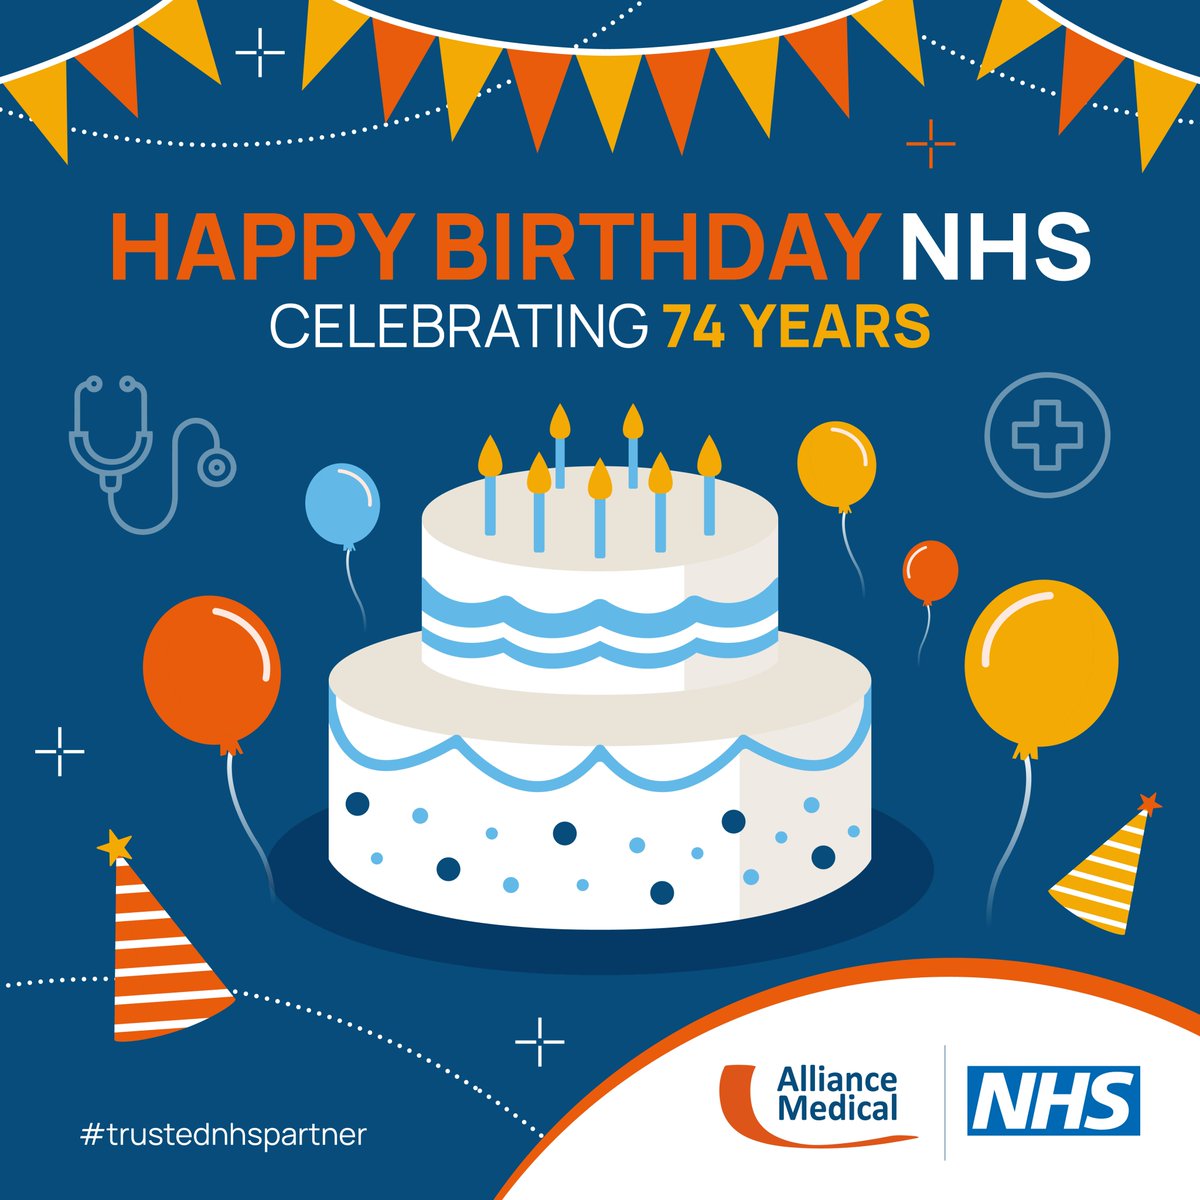 HAPPY BIRTHDAY NHS!
A phenomenal 74 years of delivering healthcare that is available to all. Congratulations.
We're so grateful to all the teams in the NHS and are proud to be your trusted partner in delivering diagnostic services.
#NHSBirthday #ThankYouNHS #TrustedNHSpartner